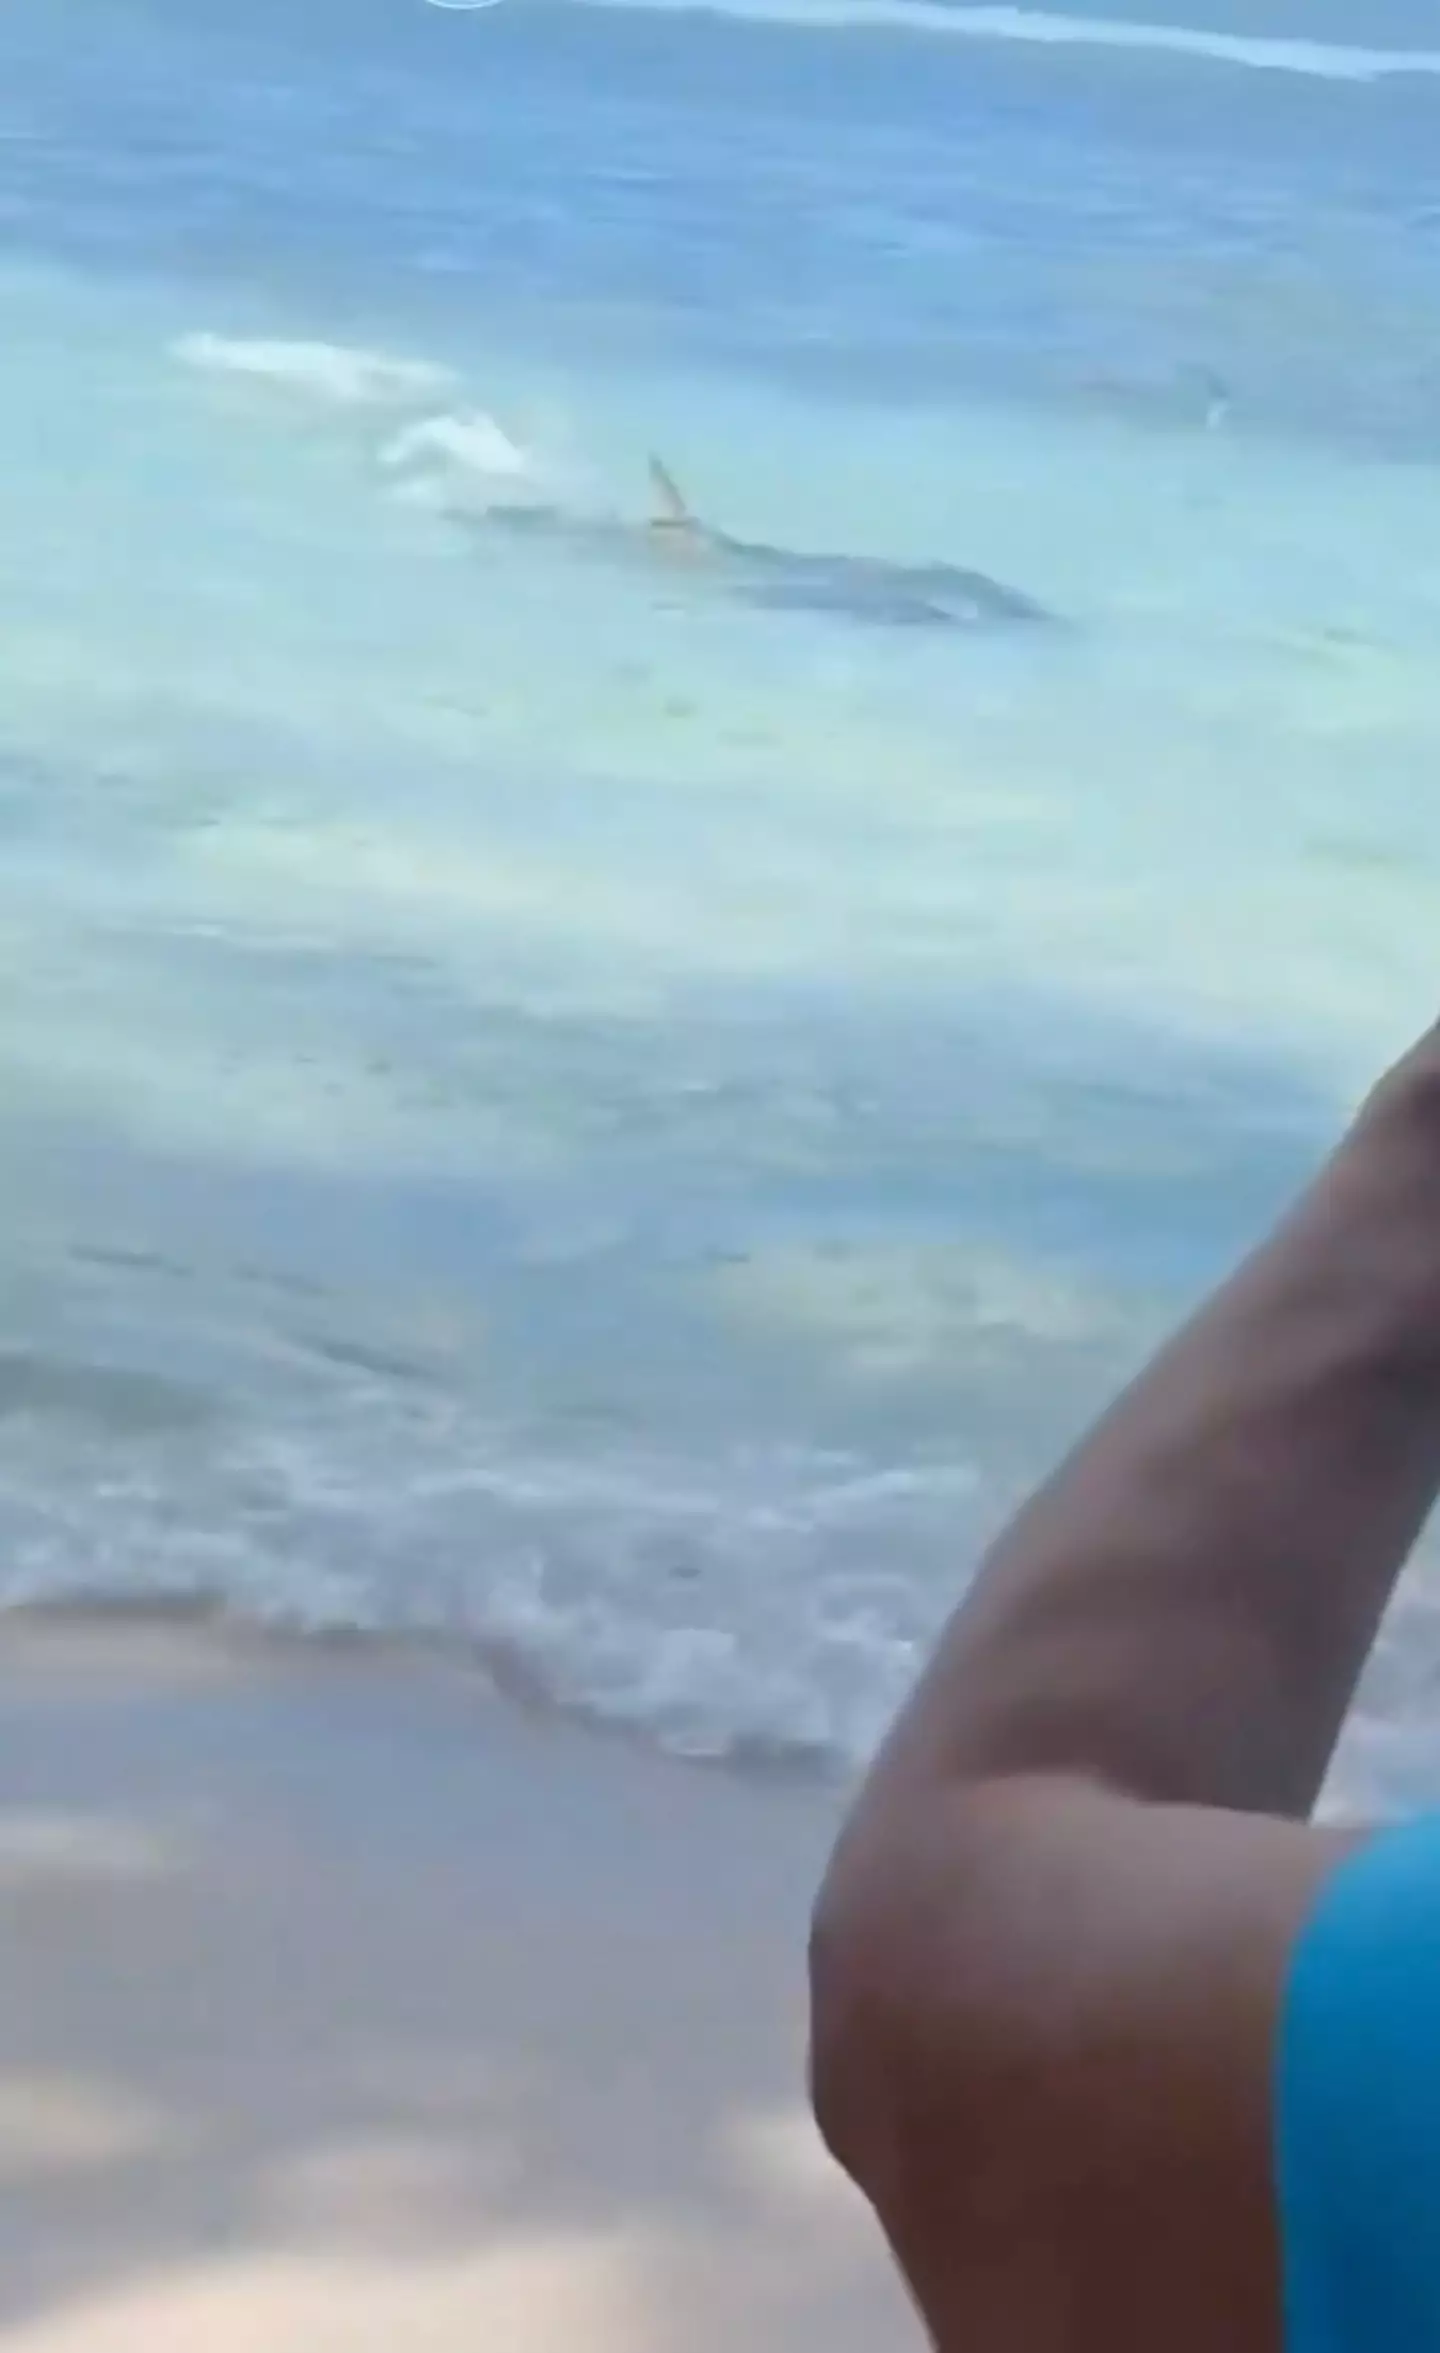 The shark ventured worryingly close to the shoreline as tourists watched in horror.